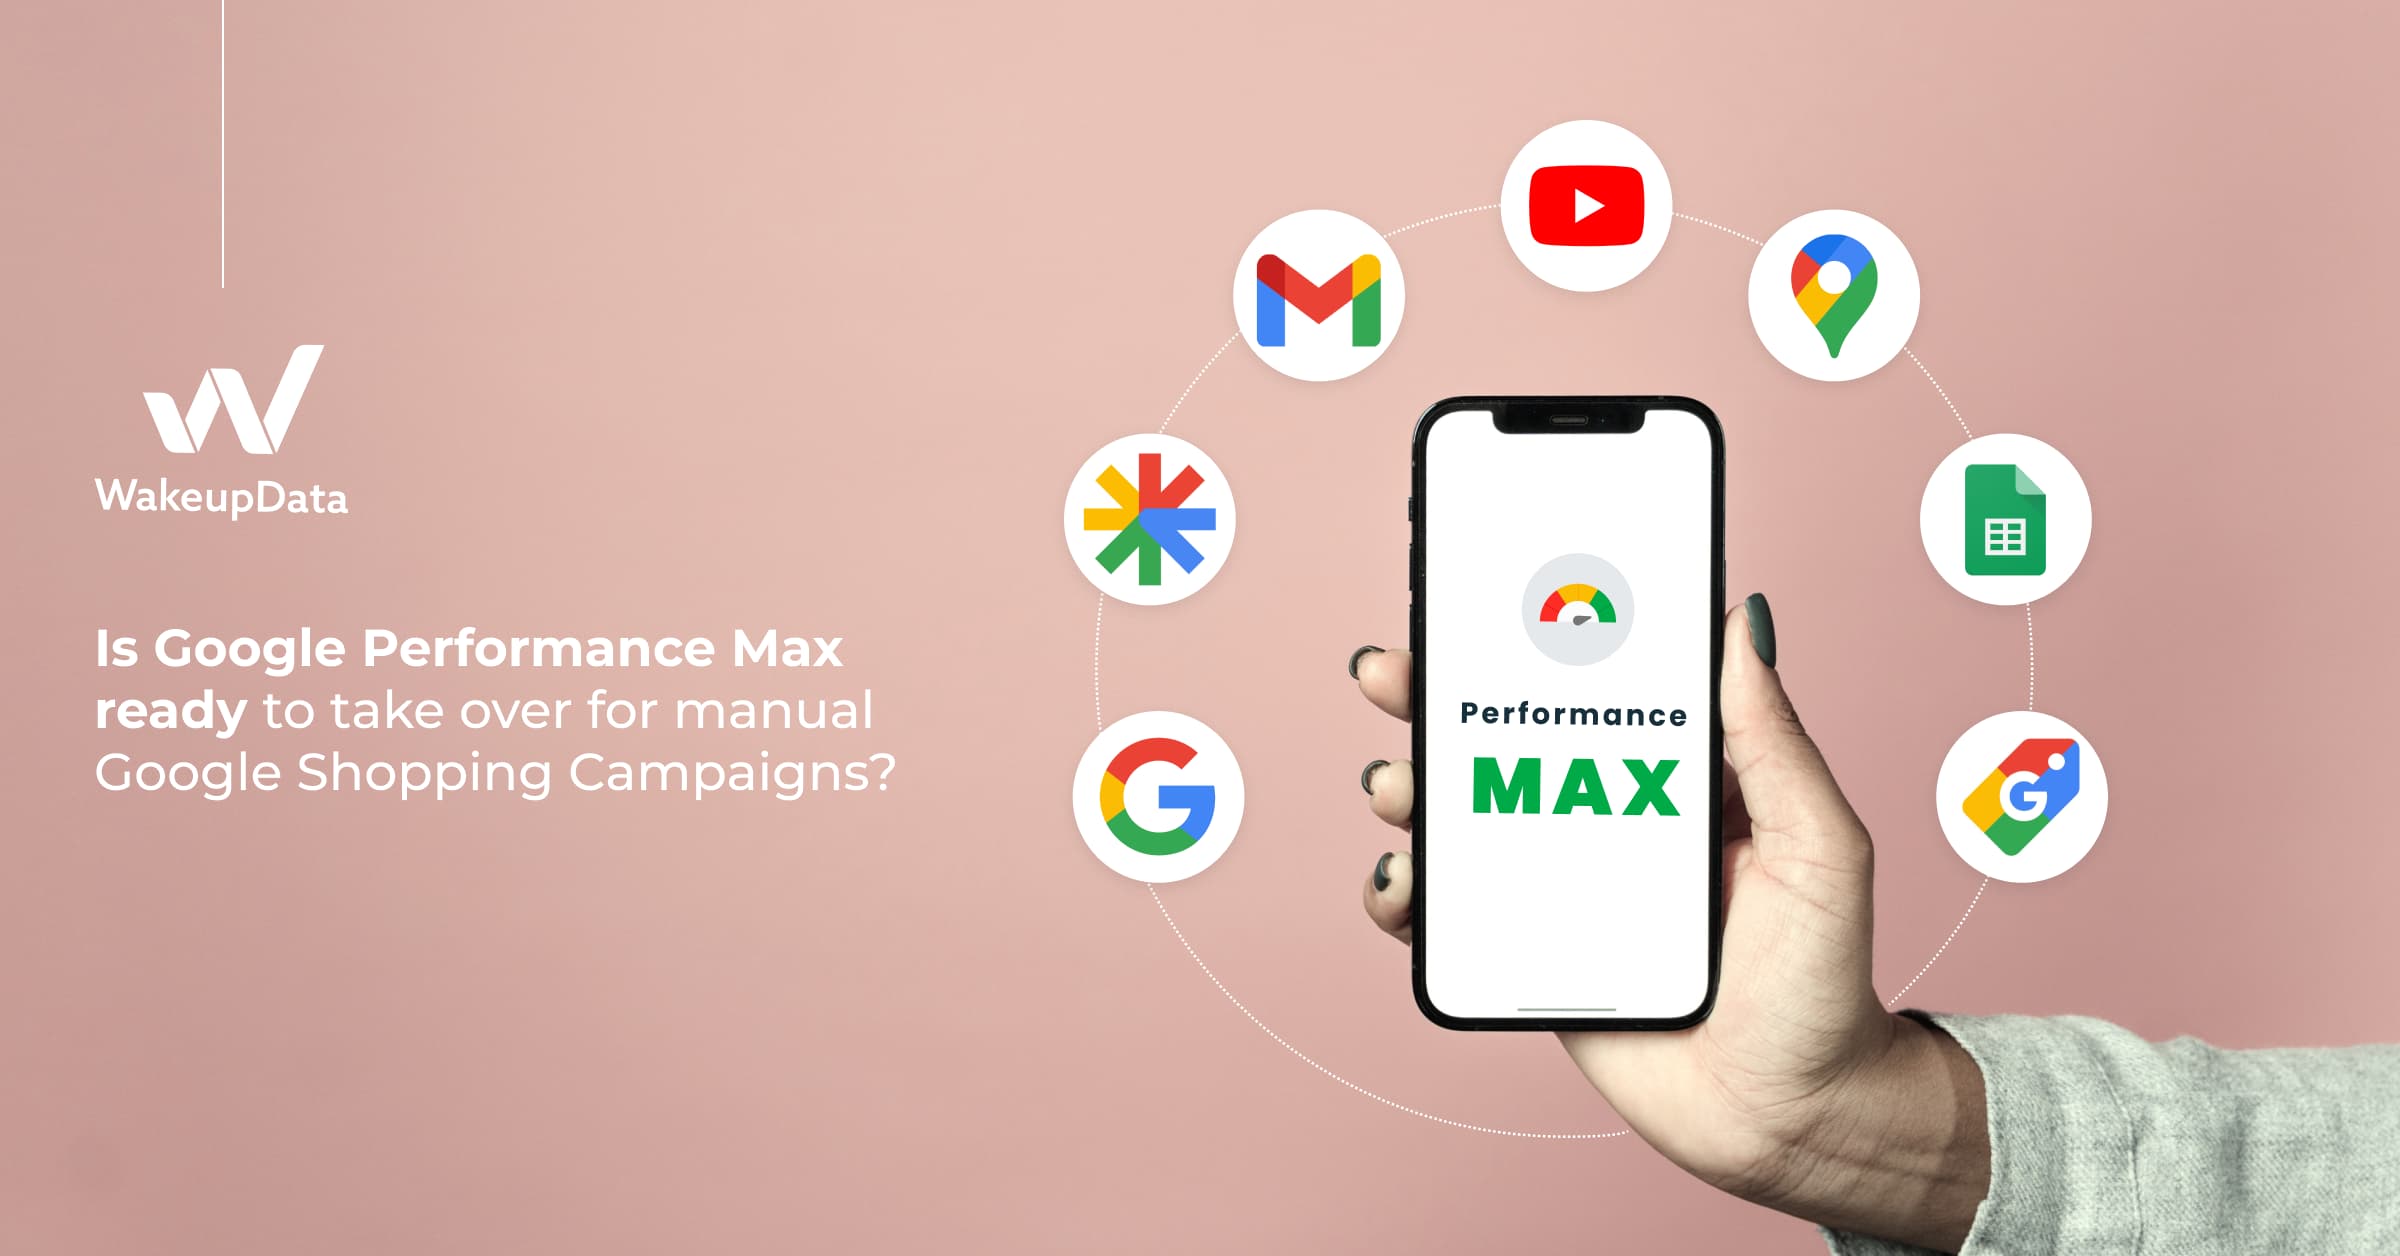 Google Performance Max - everything you need to know